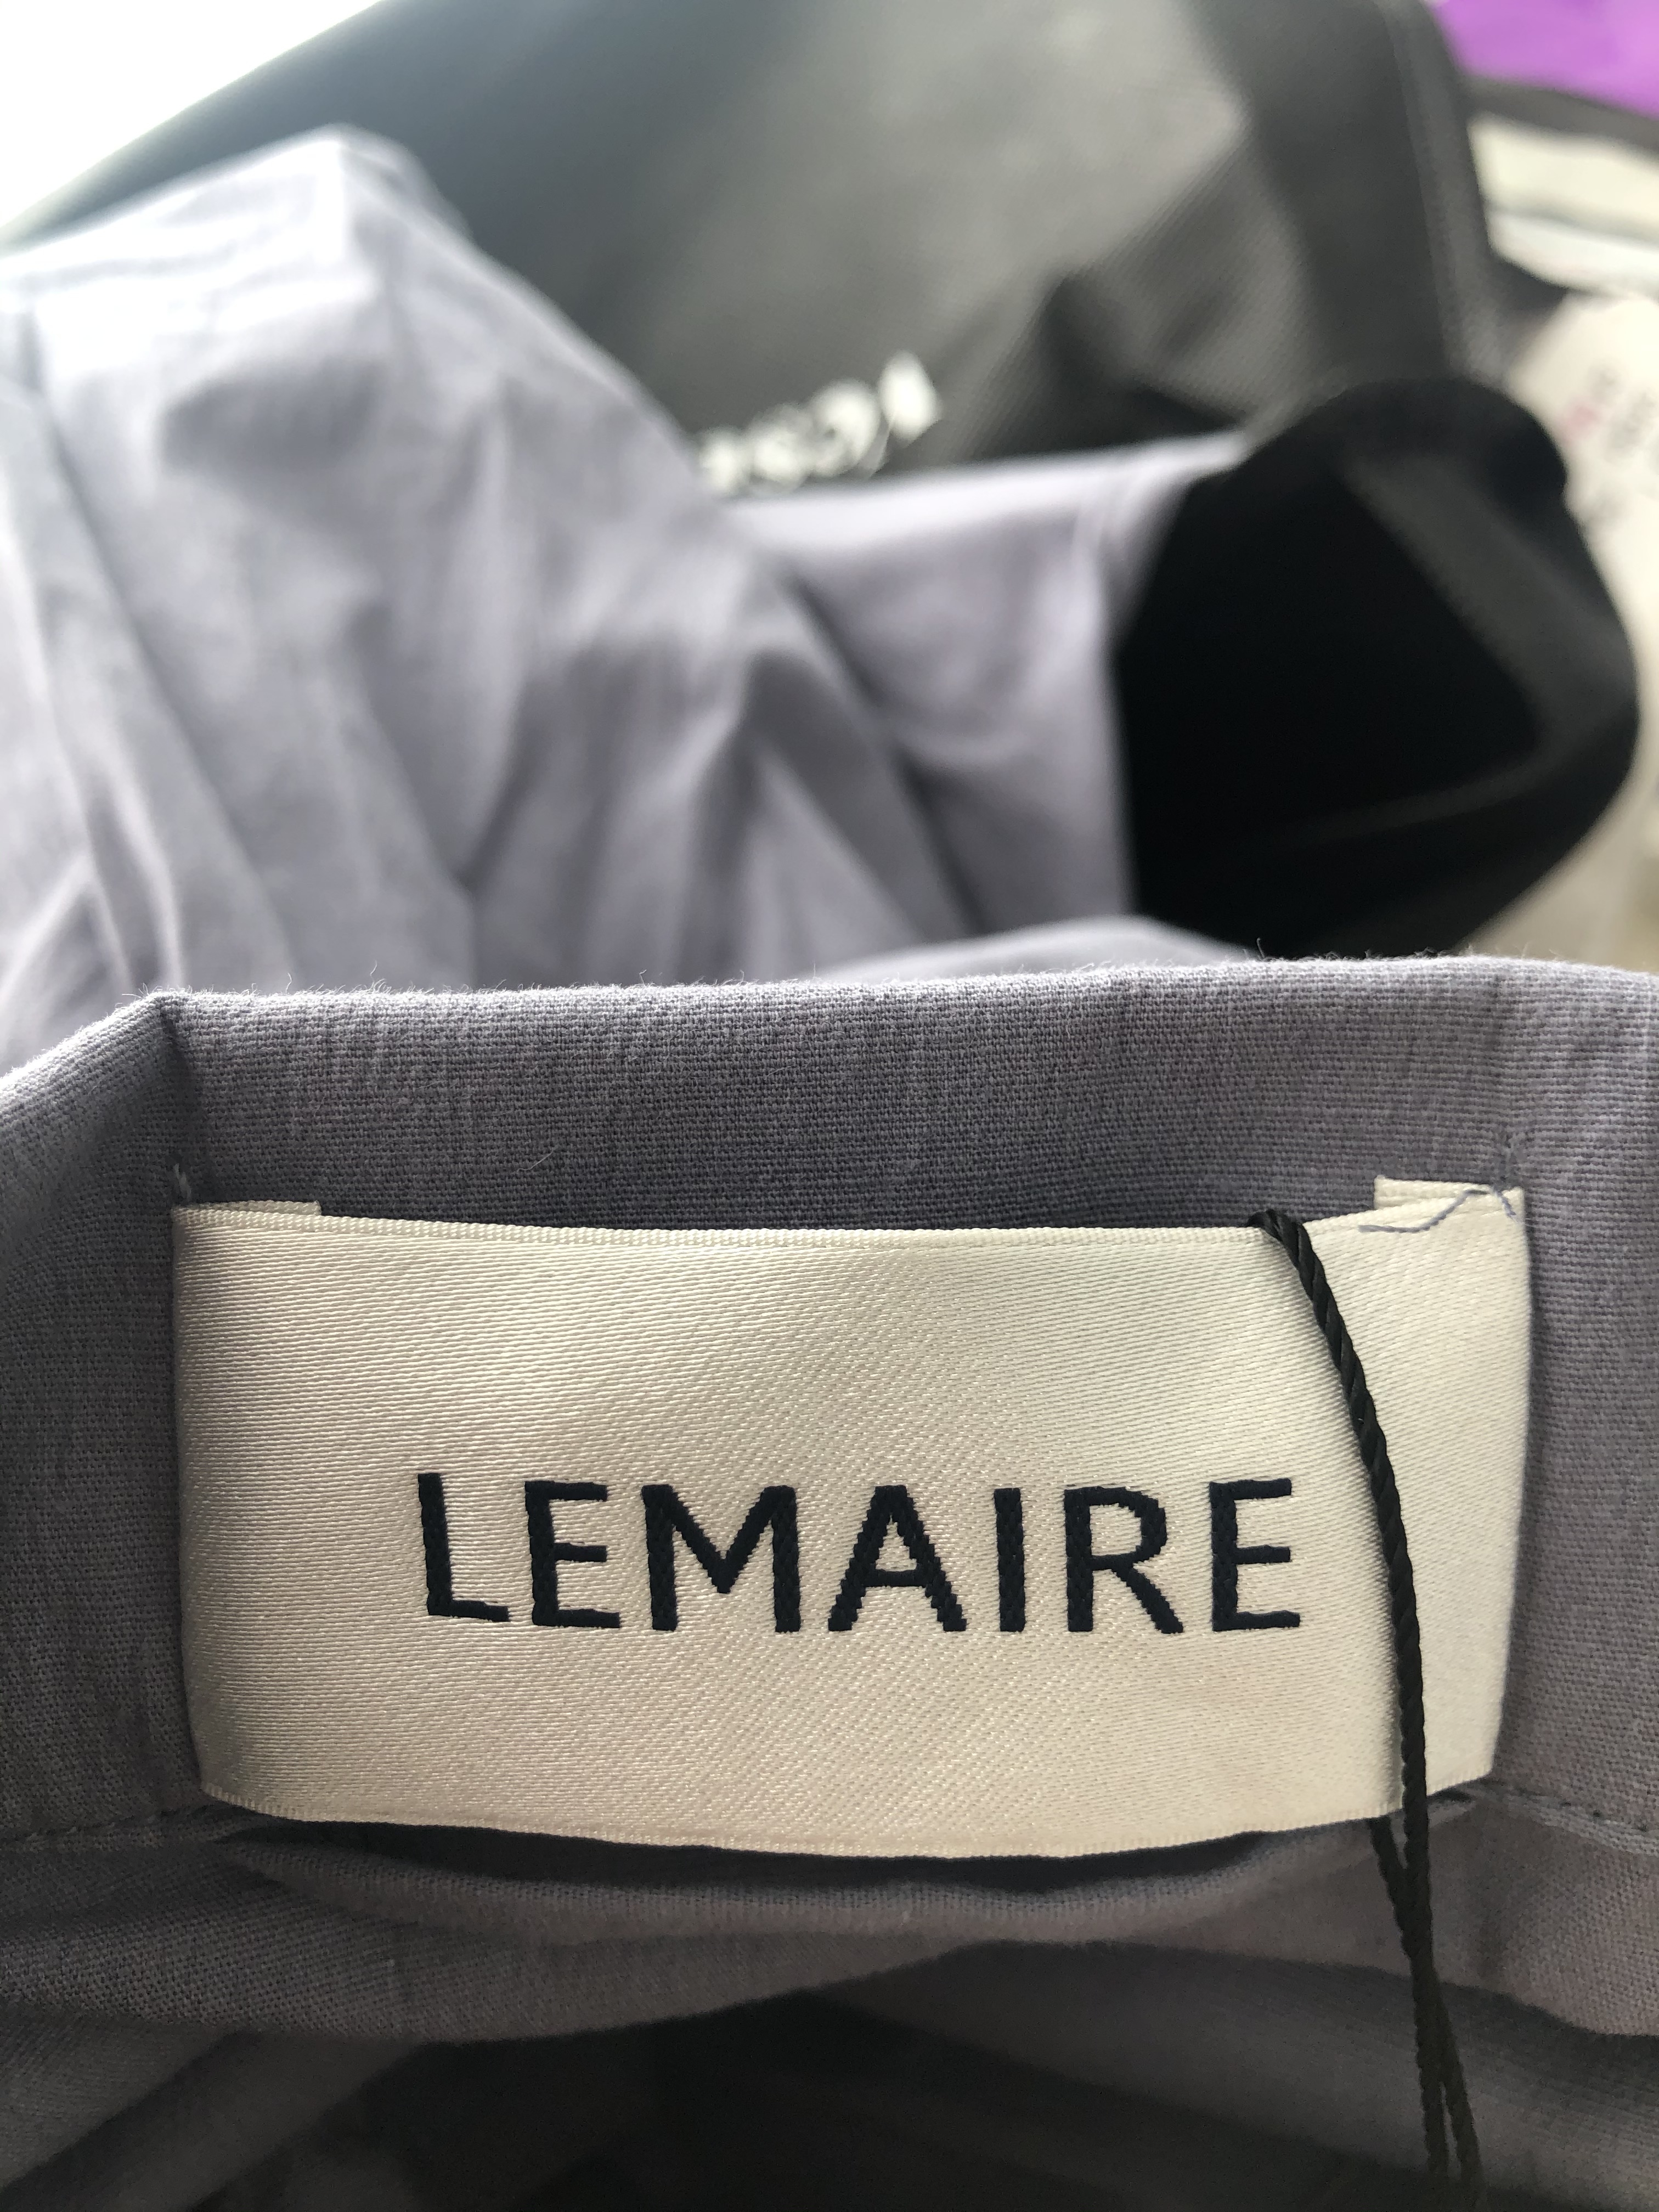 vestiaire collective review - Remarqed